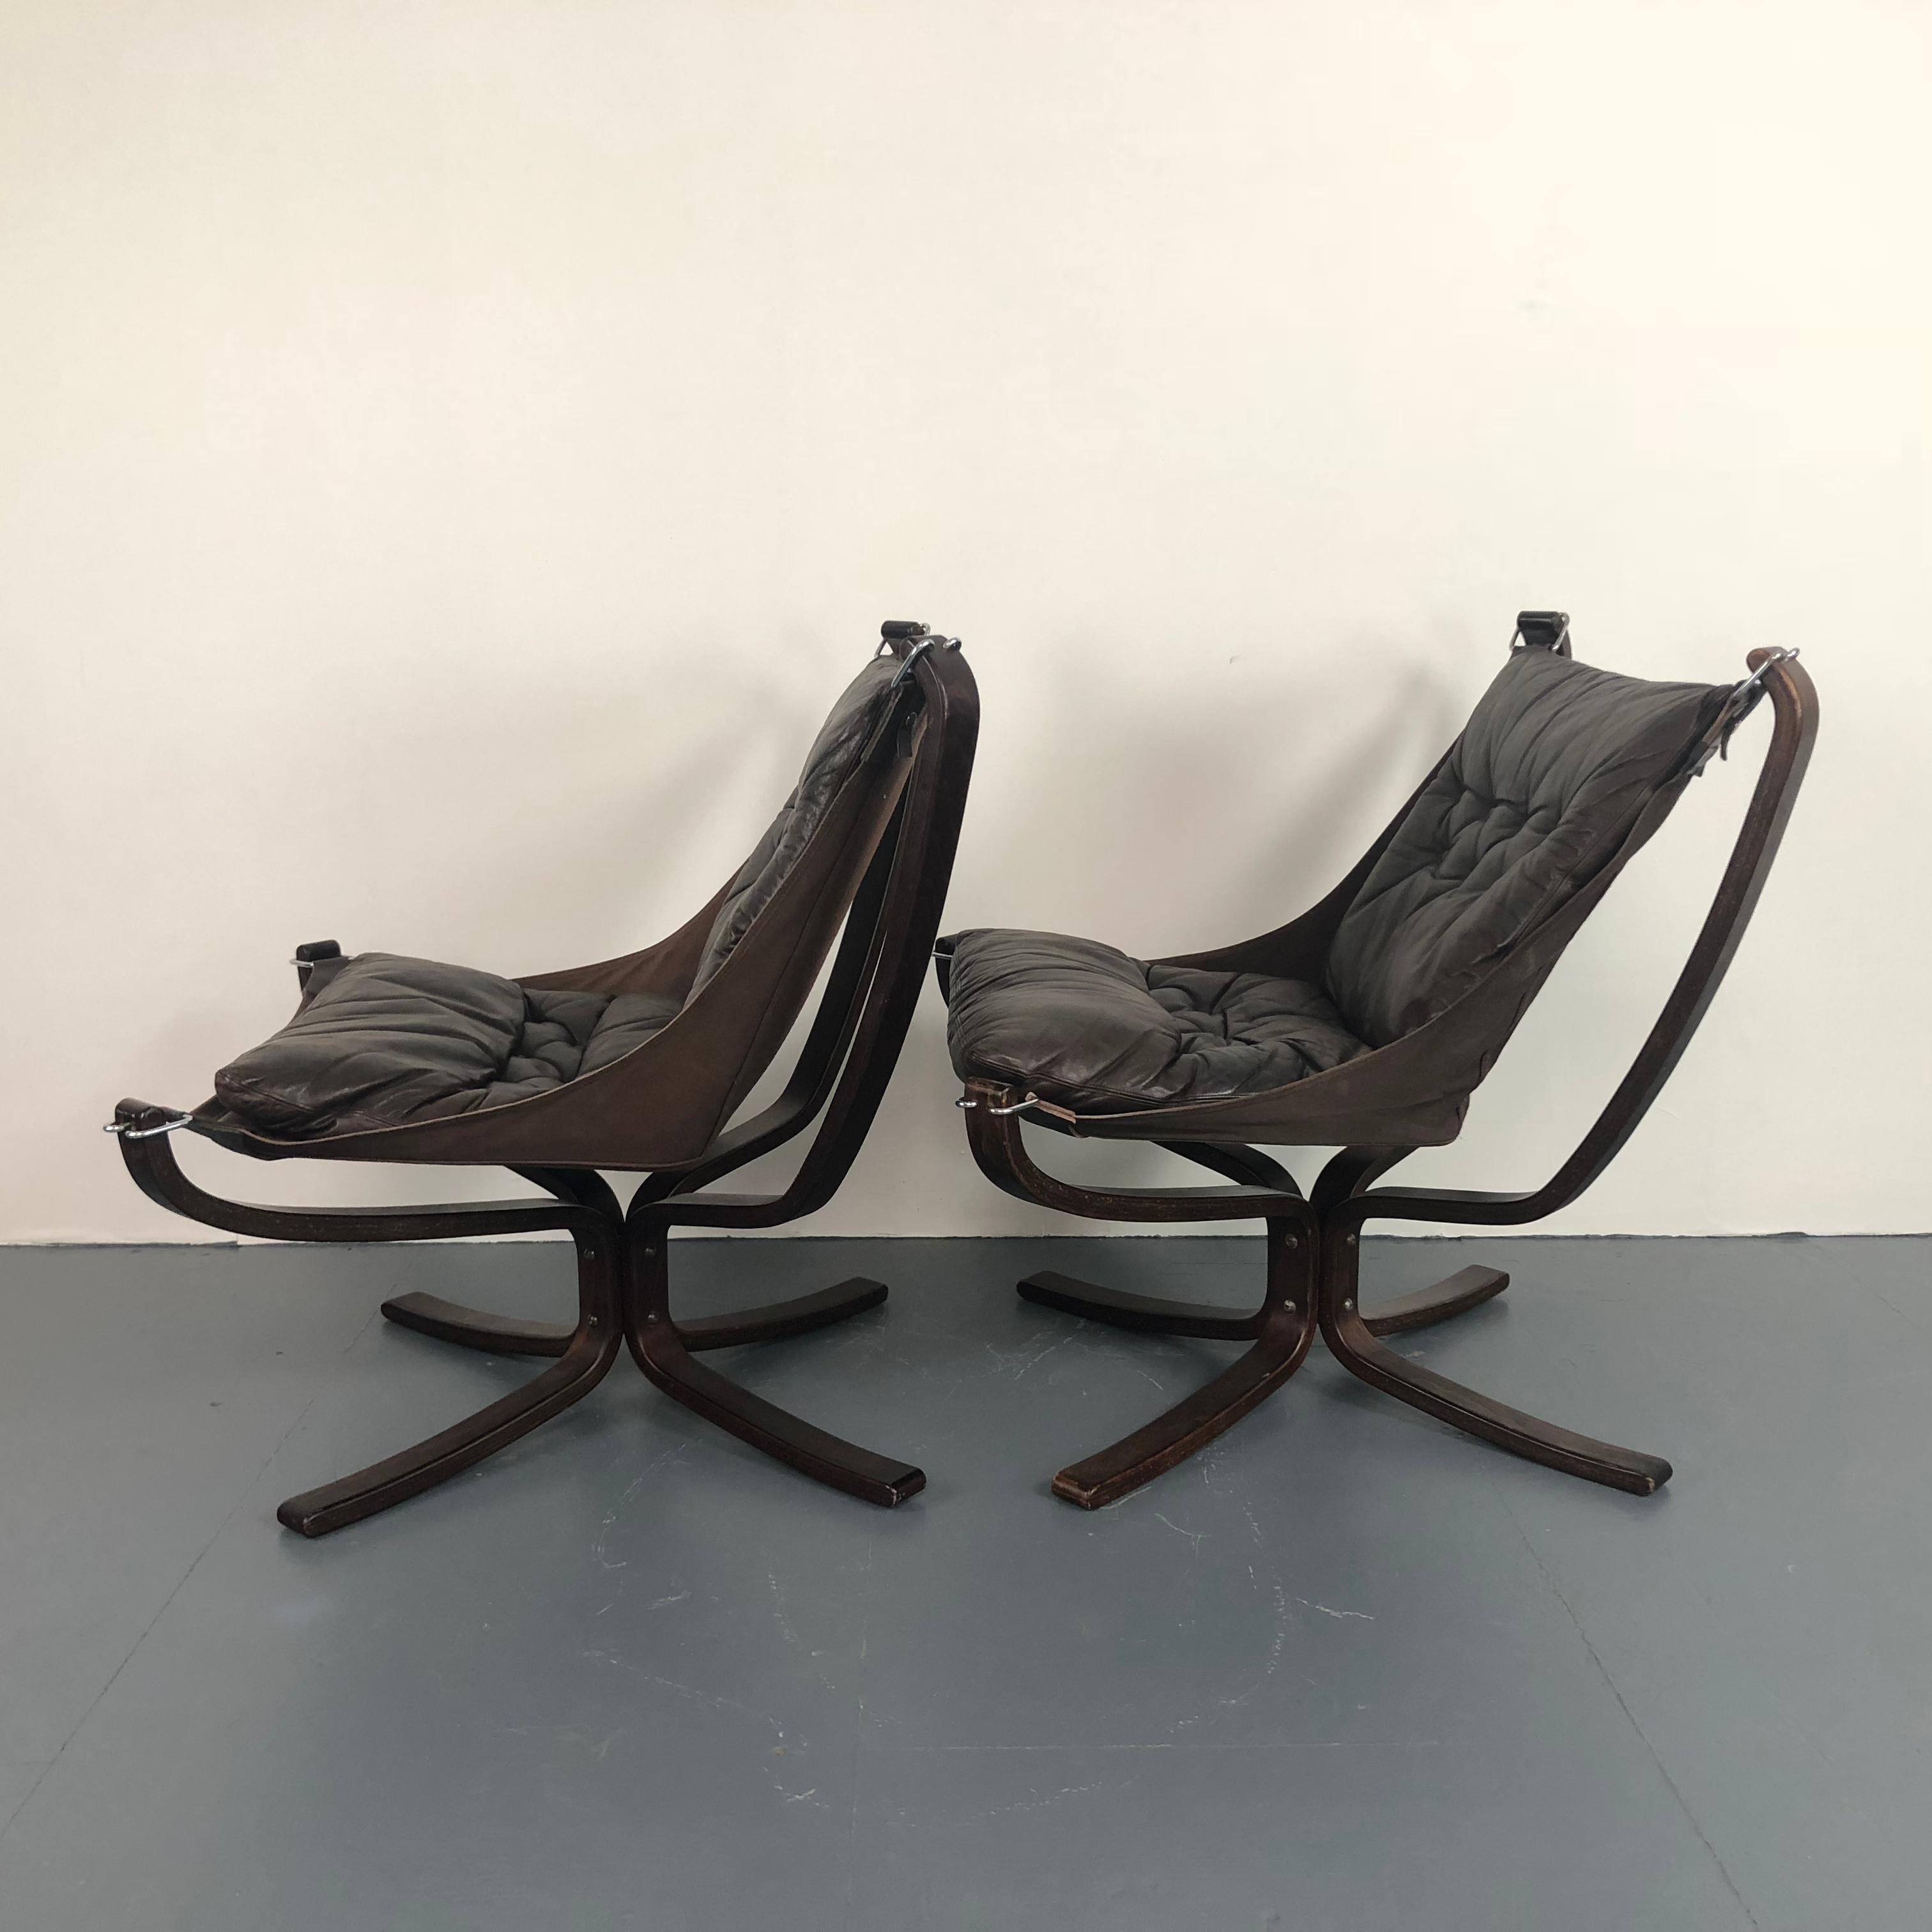 Pair of Vintage Low Back Leather Falcon Chairs Designed by Sigurd Resell In Good Condition For Sale In Lewes, East Sussex